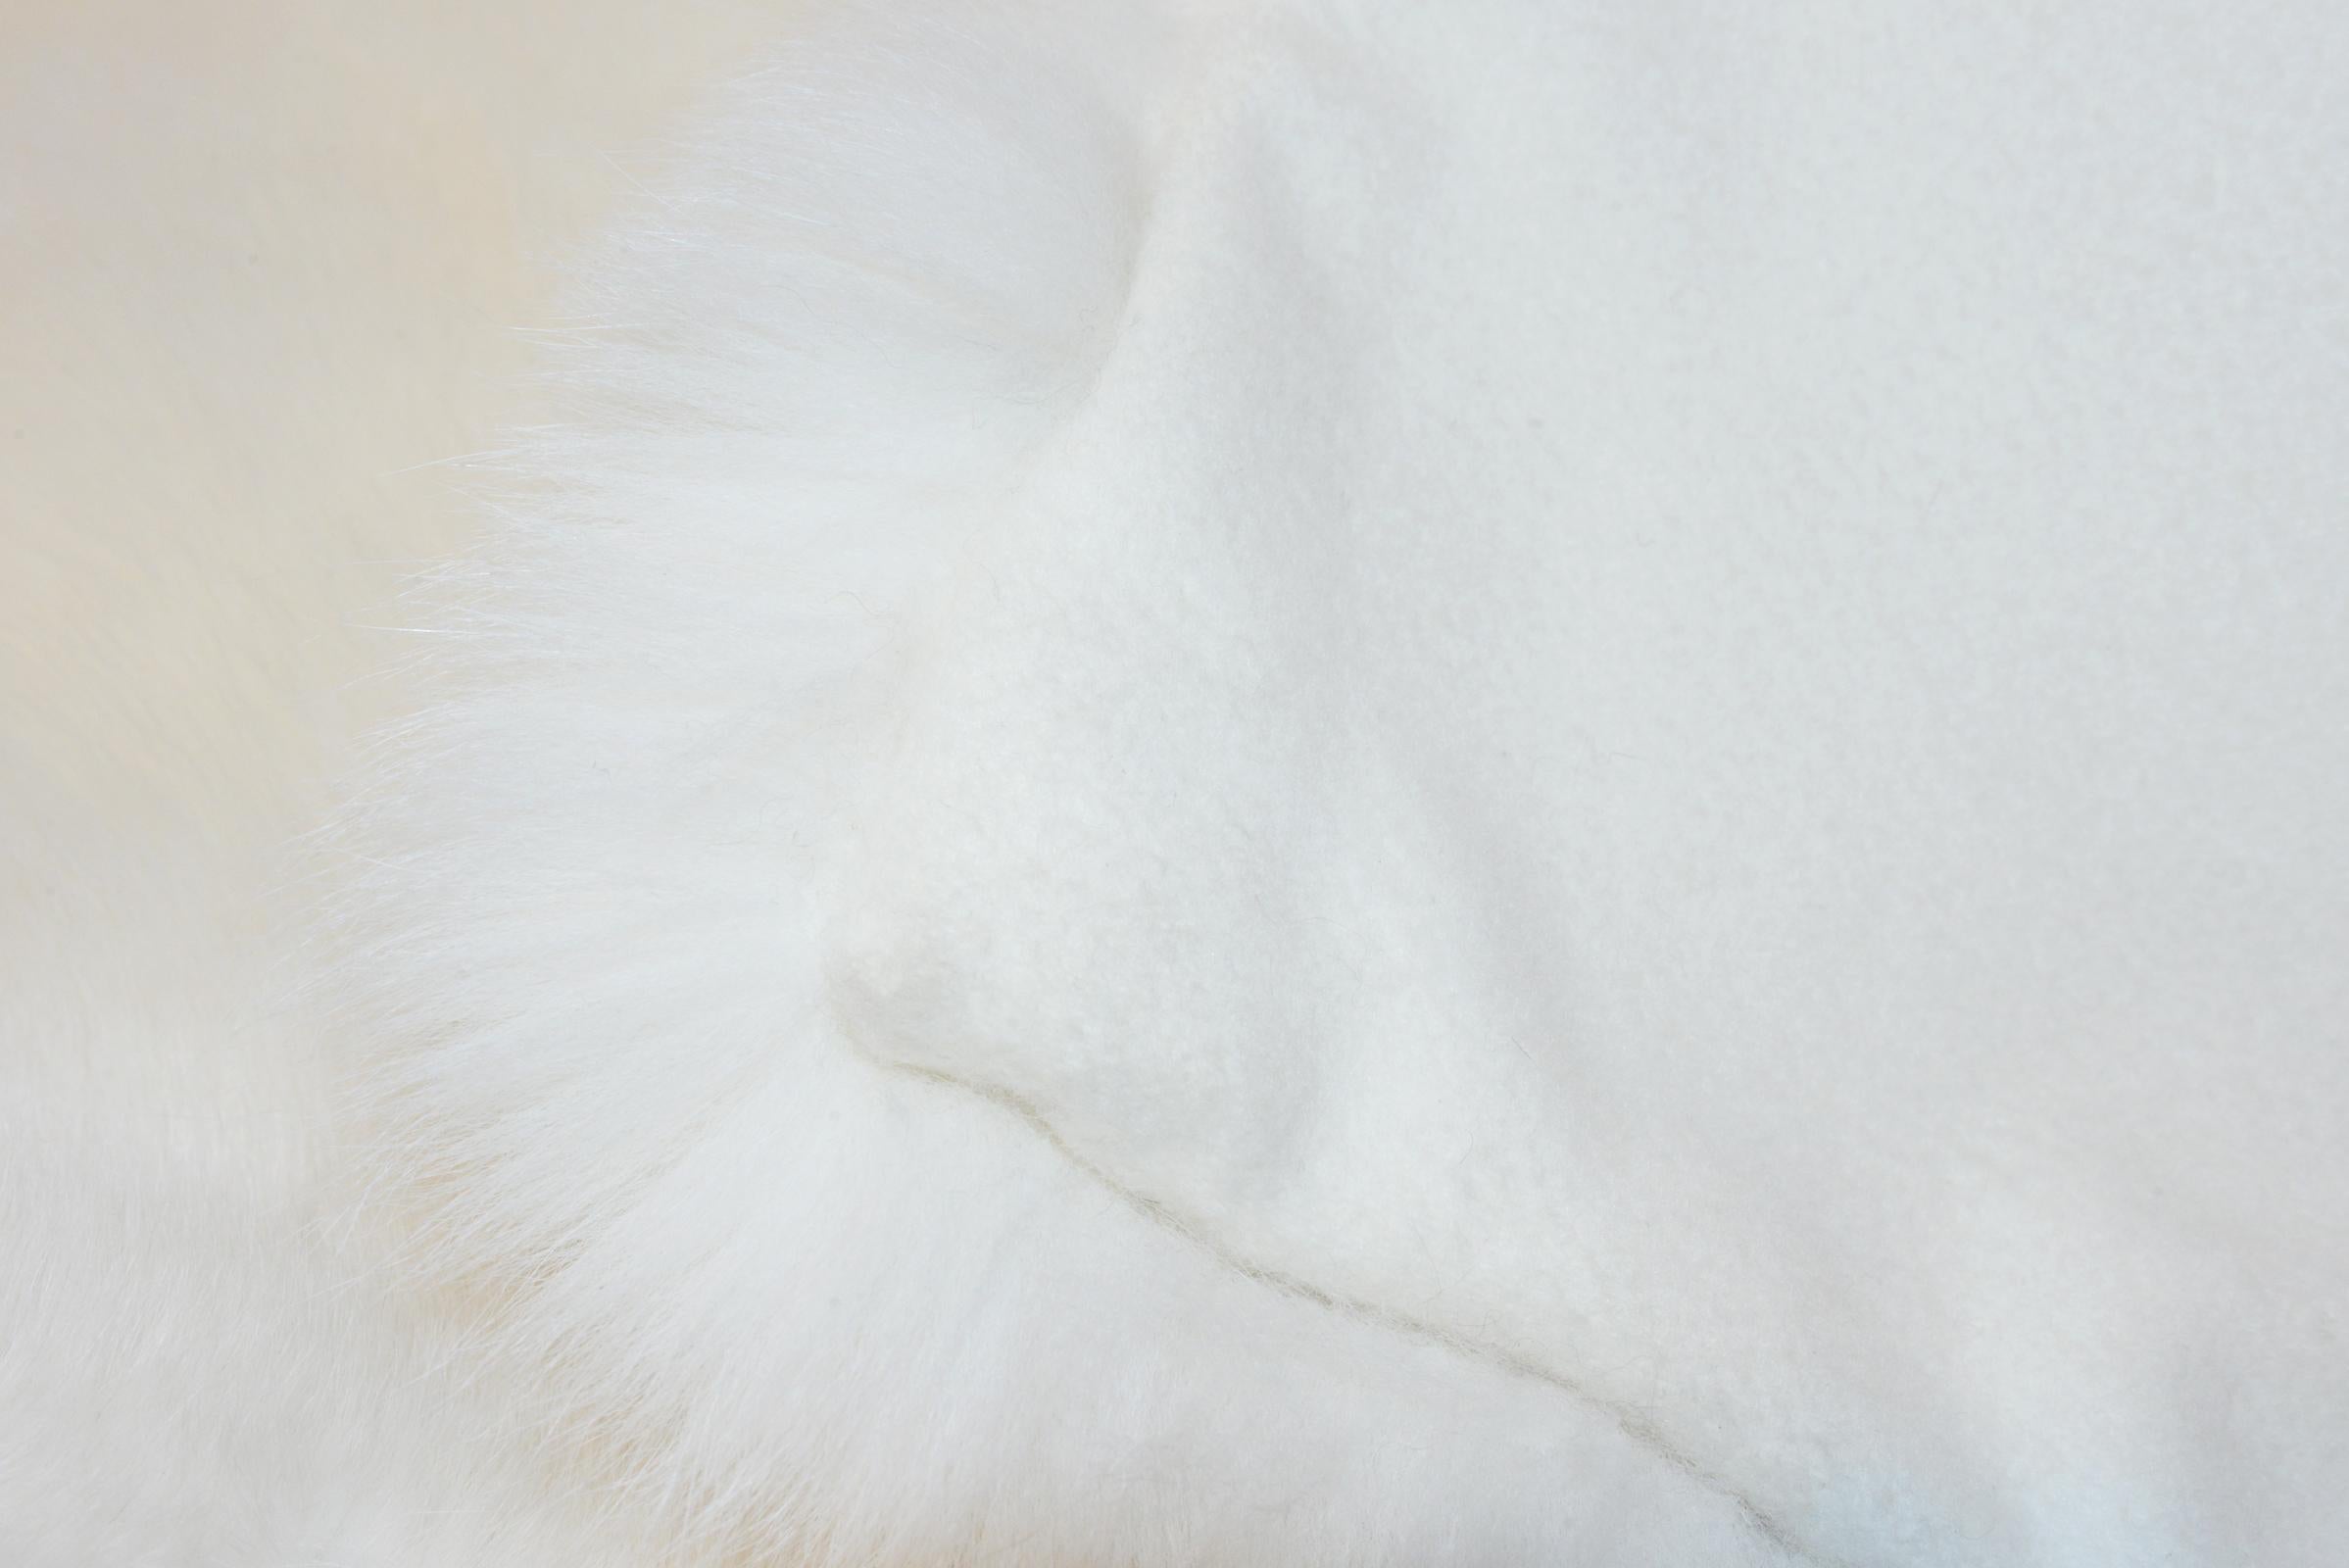 Plaid pure white fox fur from Scandinavia with
hand-sewn cashemire back. Exceptional piece
and high quality handmade.